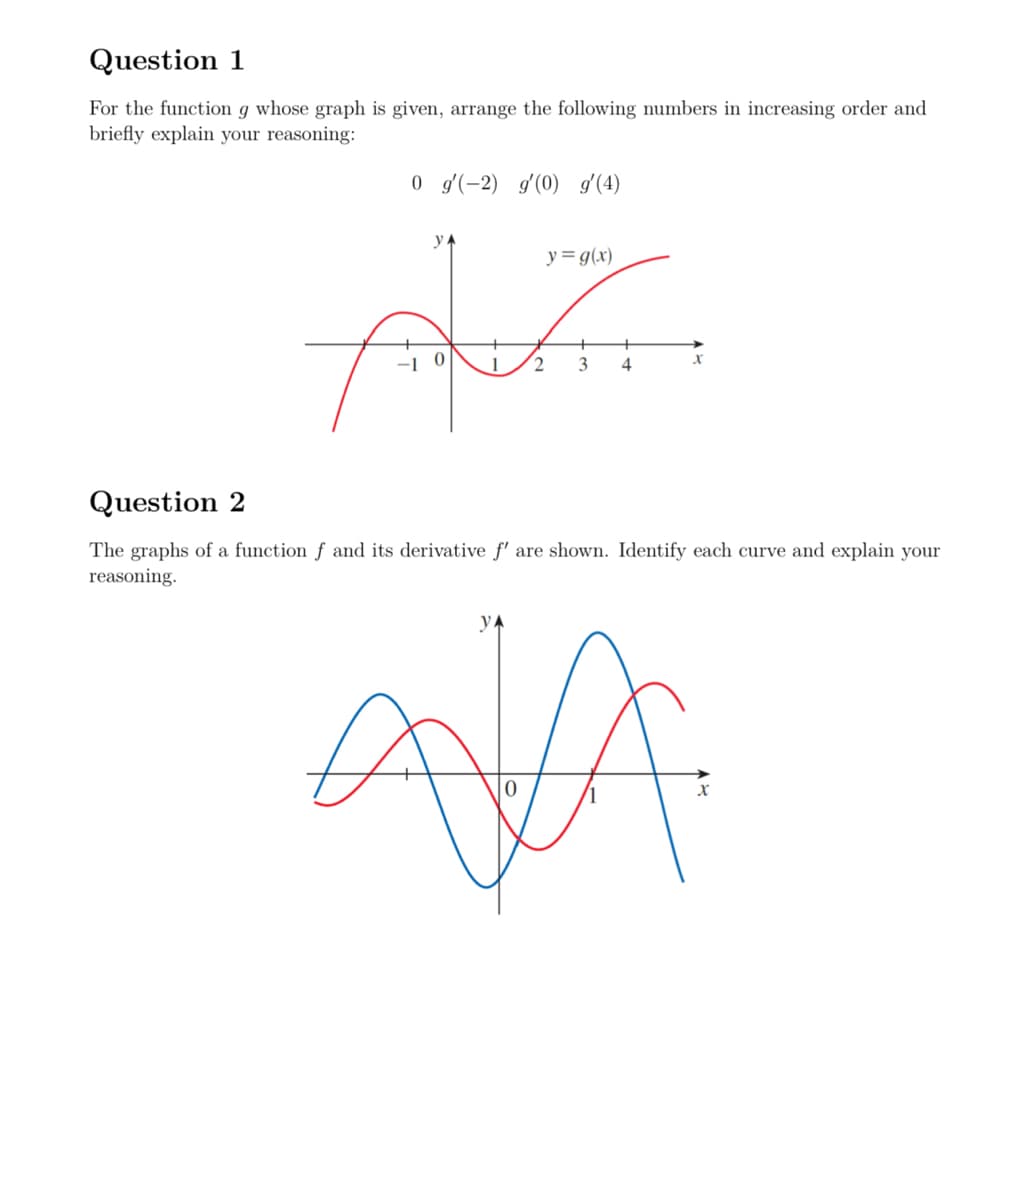 Question 1
For the function g whose graph is given, arrange the following numbers in increasing order and
briefly explain your reasoning:
0 g(-2) g'(0) g'(4)
YA
y= g(x)
Question 2
A
1 2
x
3
4
The graphs of a function f and its derivative f' are shown. Identify each curve and explain your
reasoning.
AJA
X